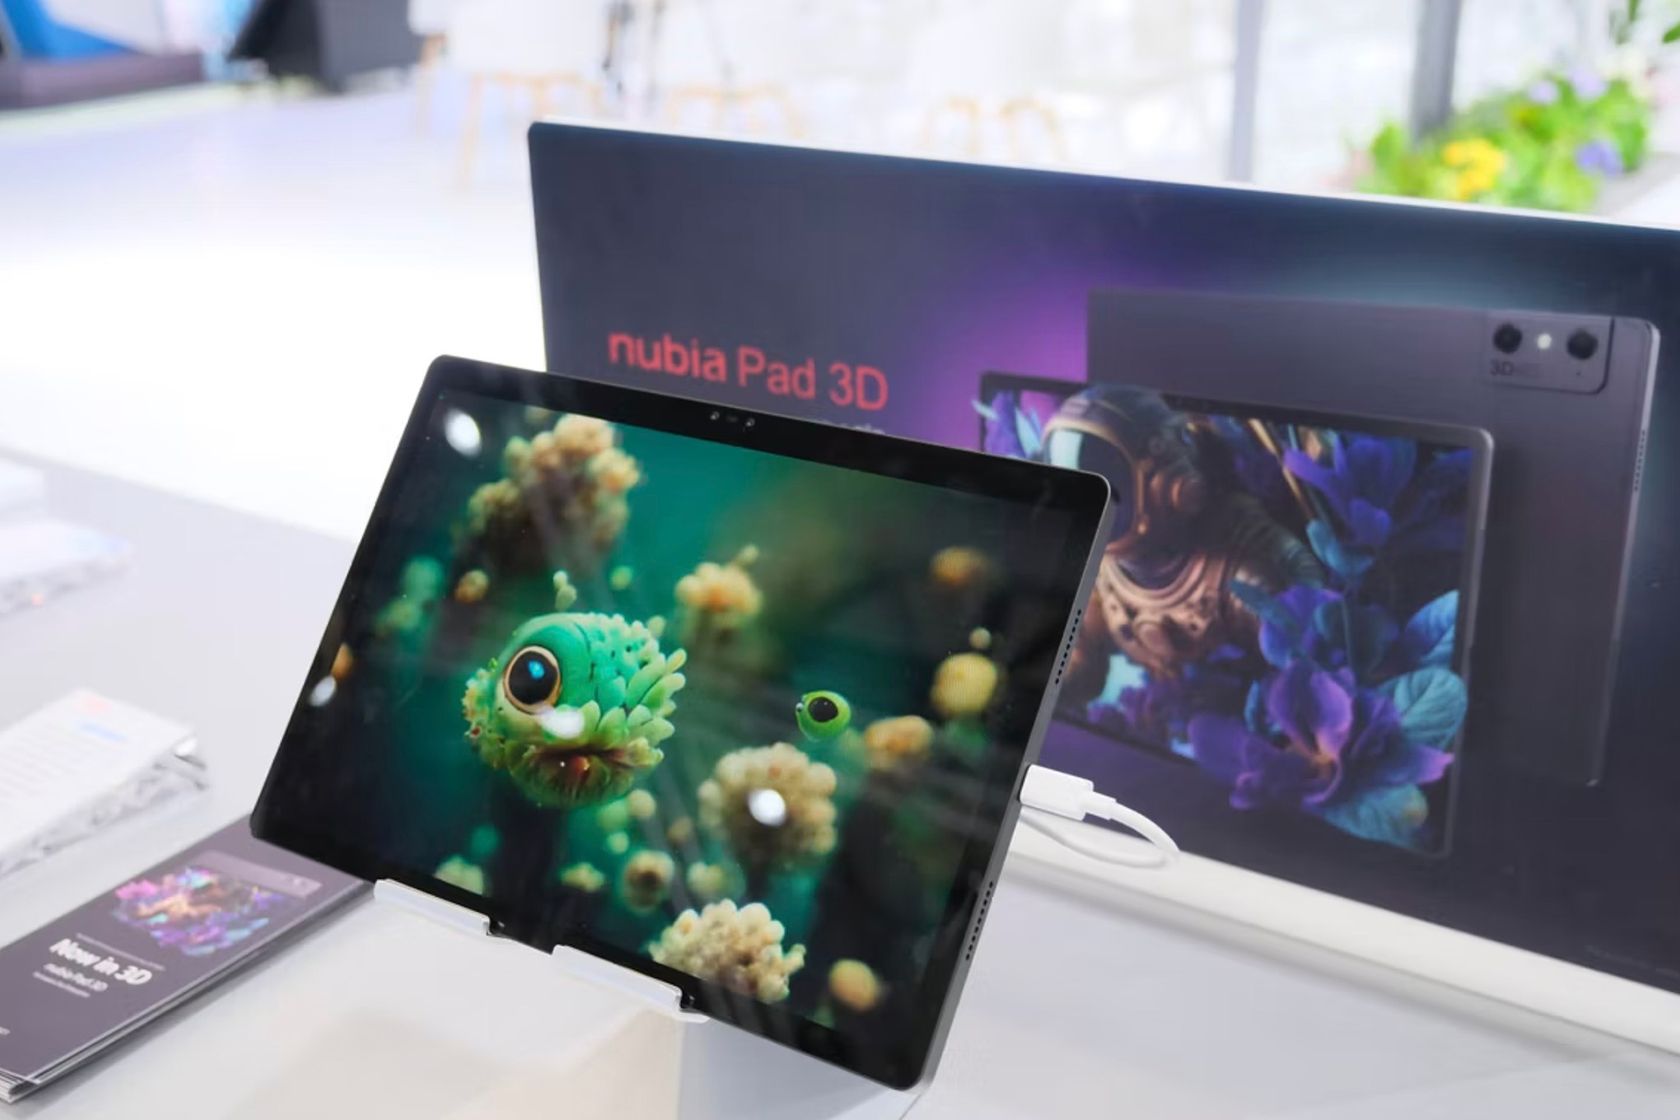 ZTE launches the Nubia Pad 3D, a glasses-free 3D tablet